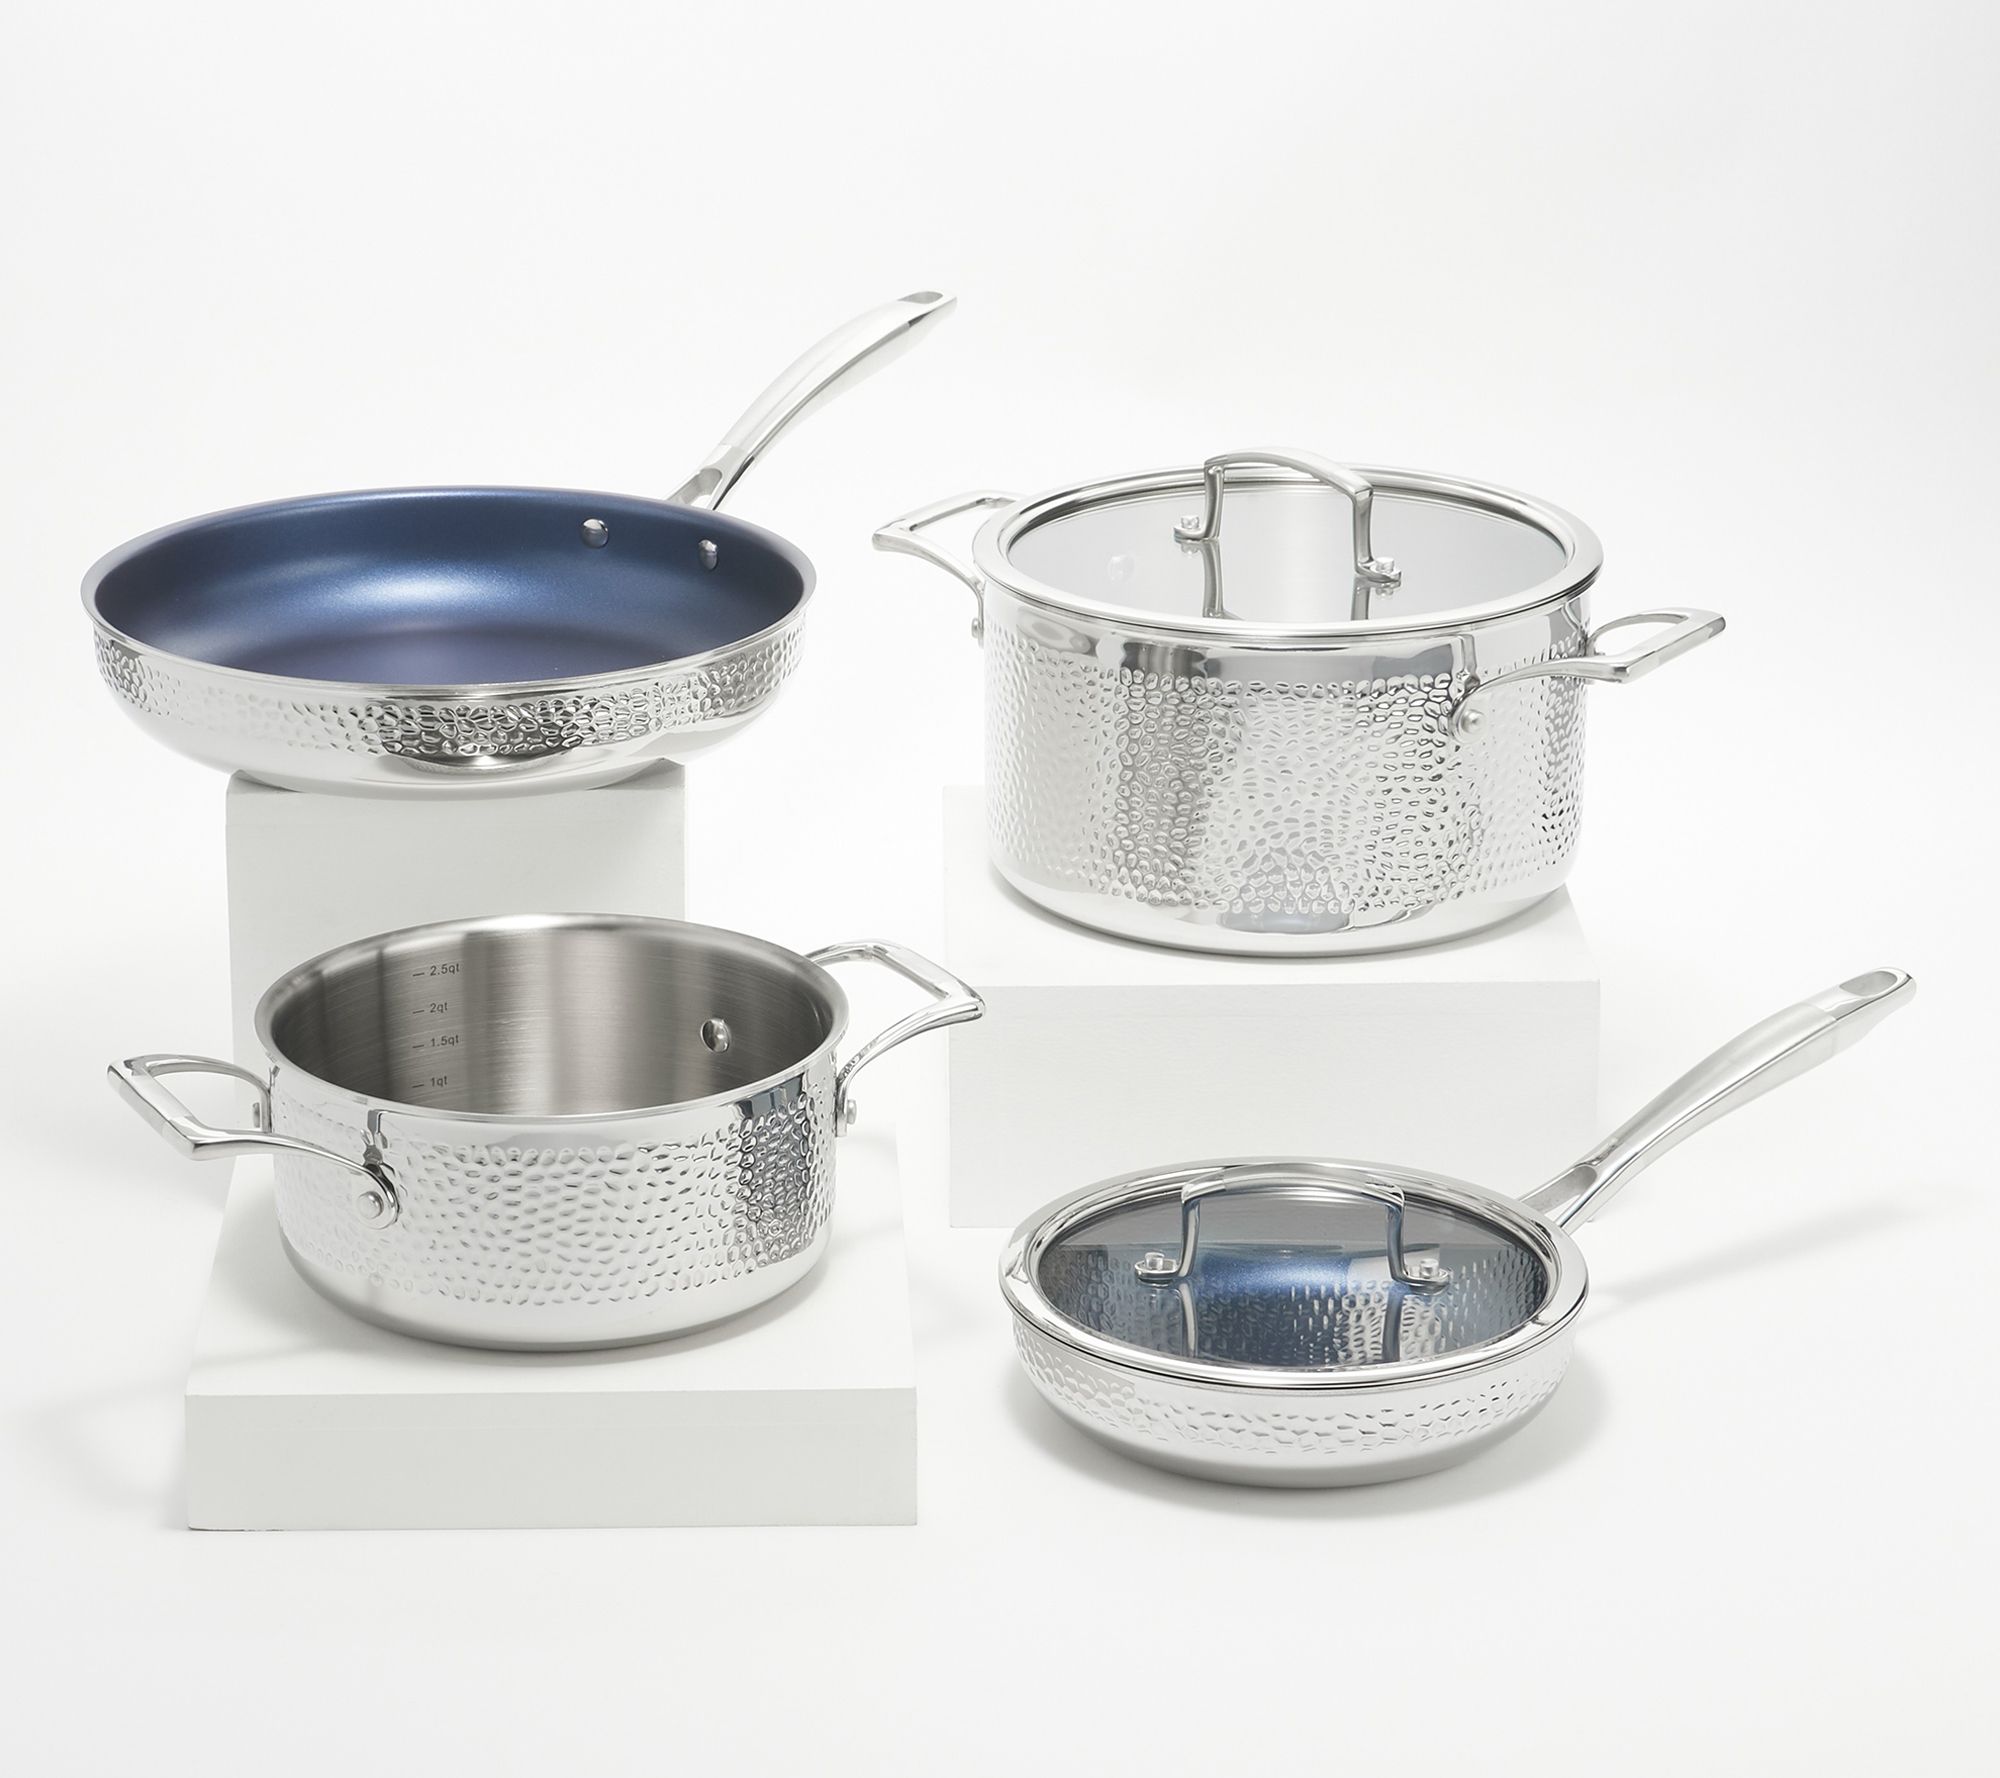 Blue Jean Chef 3-Pc Hammered Tri-Ply Stainless Steel Cookware Set Refurbished 